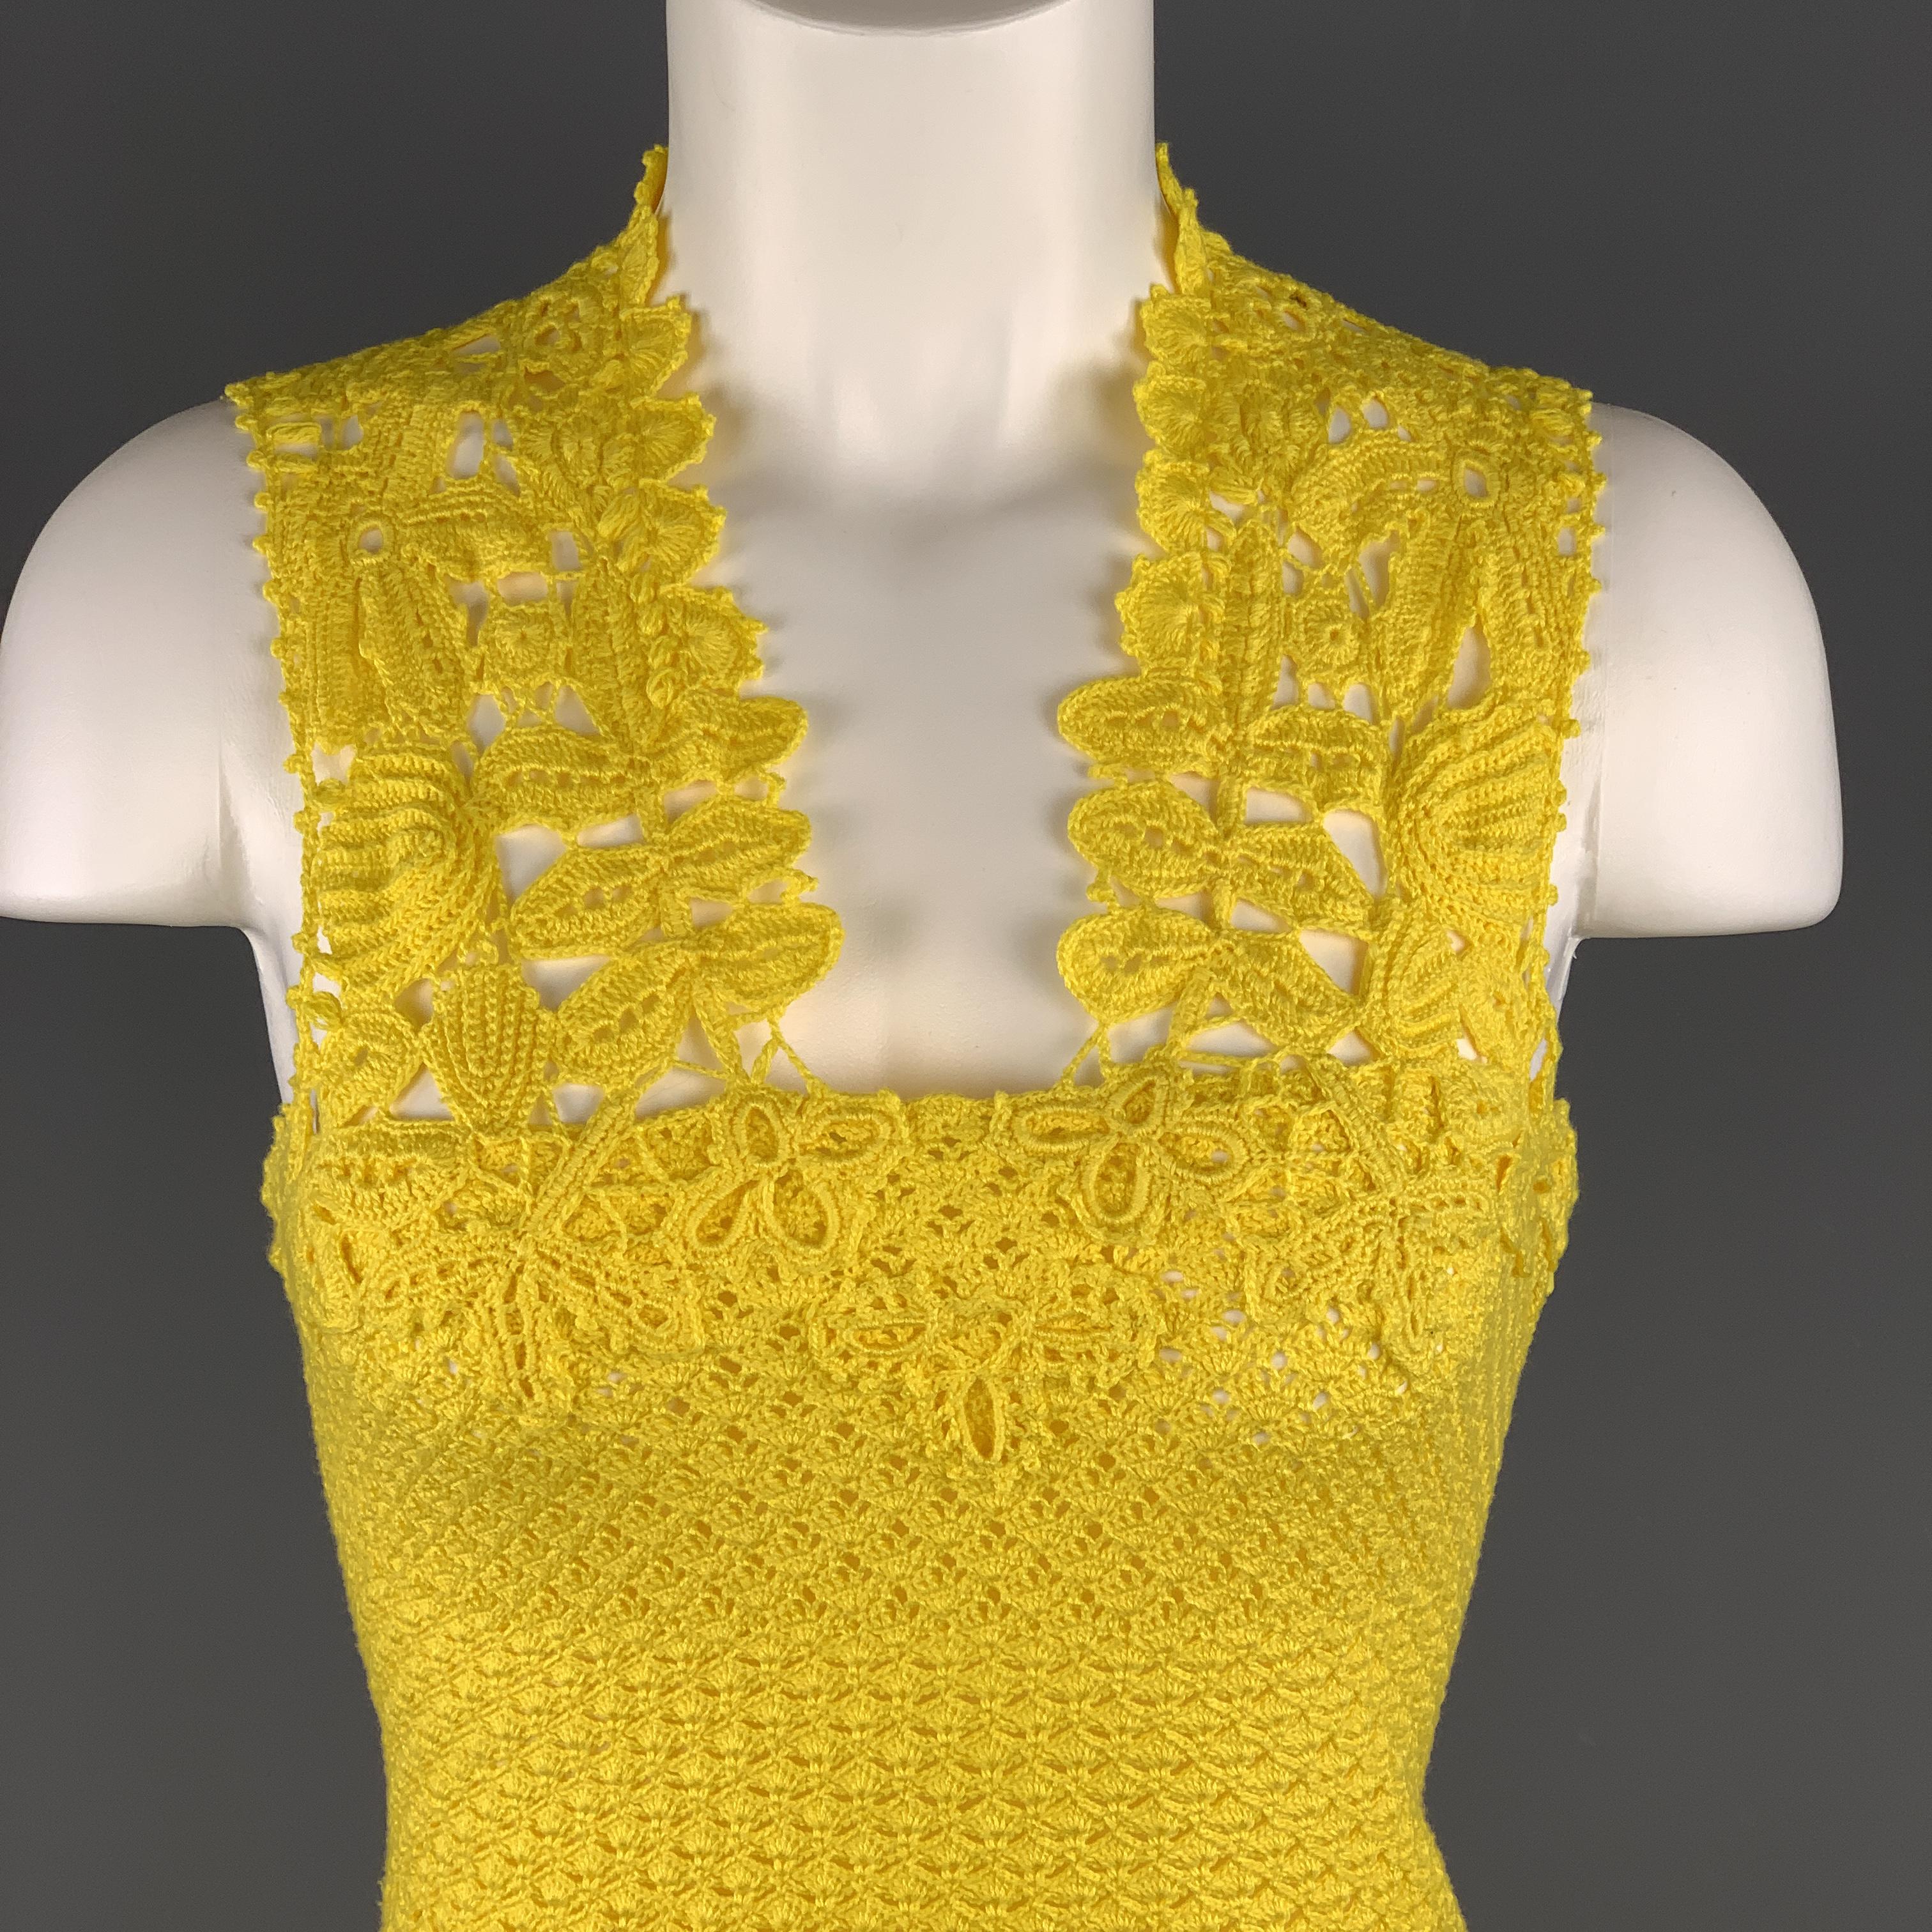 OSCAR DE LA RENTA dress comes in bold yellow hand knitted cotton crochet lace with a squared off V neck line, fit fare silhouette, and silk slip. 

Excellent Pre-Owned Condition.
Marked: XS/TP

Measurements:

Shoulder: 13 in.
Bust: 33 in.
Waist: 27